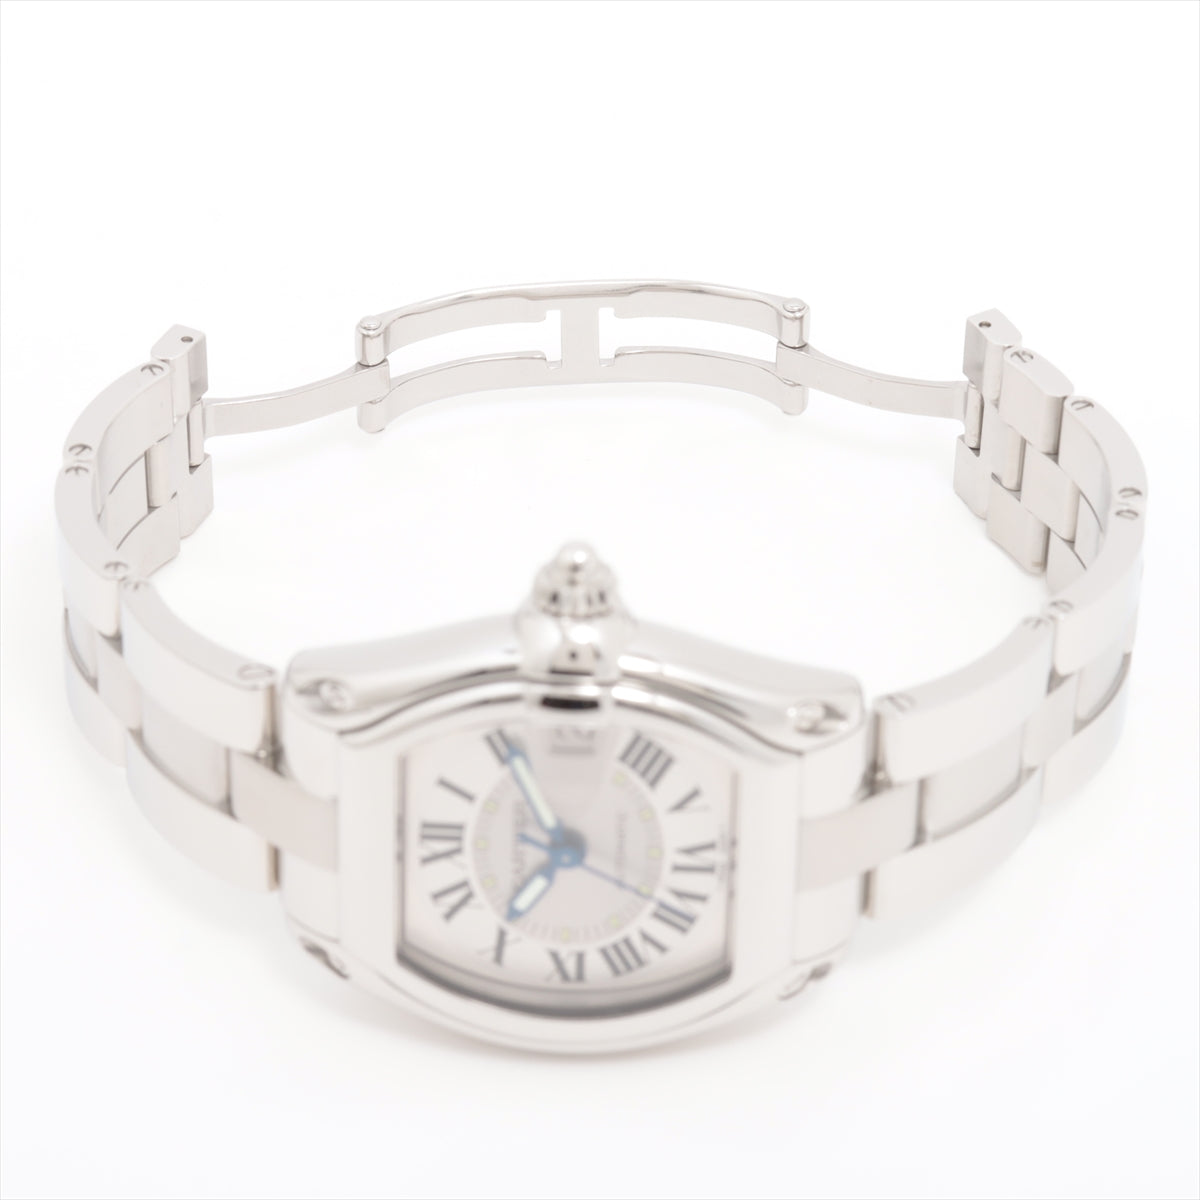 Cartier Roadster LM W62000V3 SS AT Silver-Face Extra-Link 5